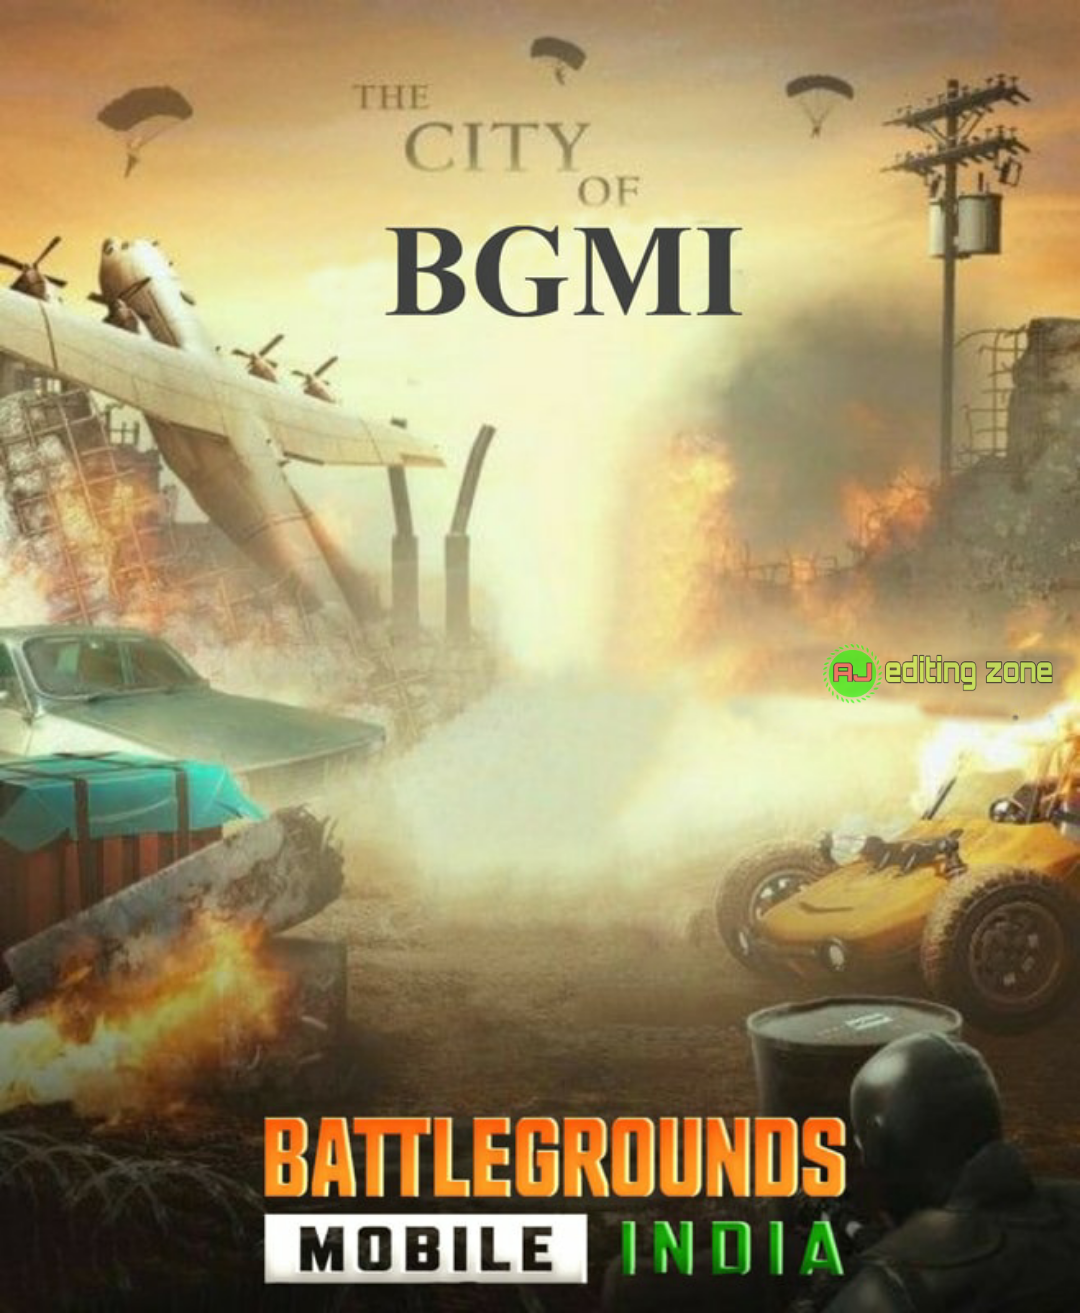 100+ Battleground Mobile India Hd Background Images | PUBG India Photo Editing Backgrounds Download